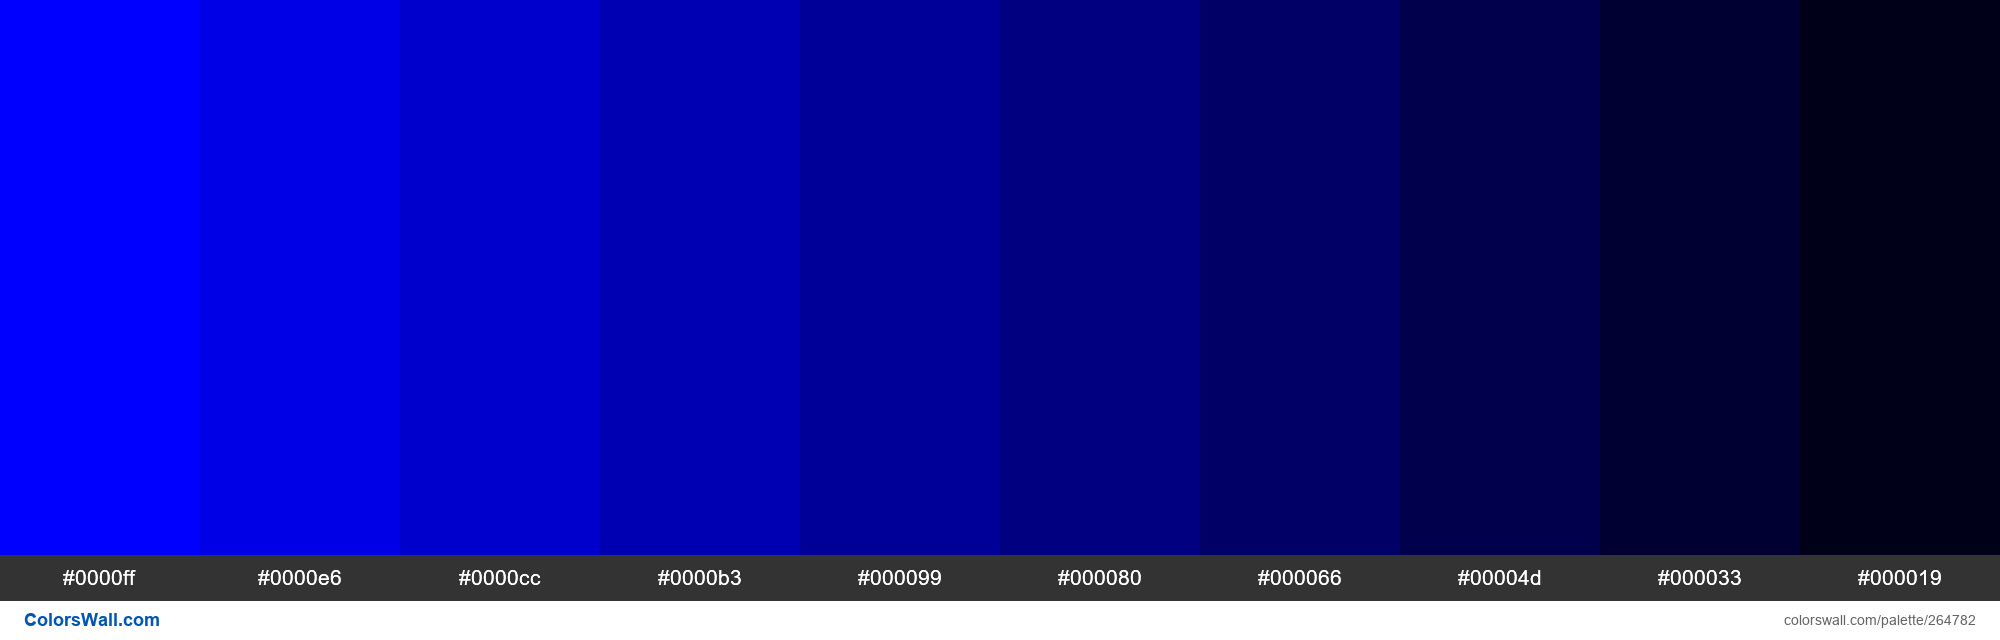 Blue- Shade colors palette - ColorsWall